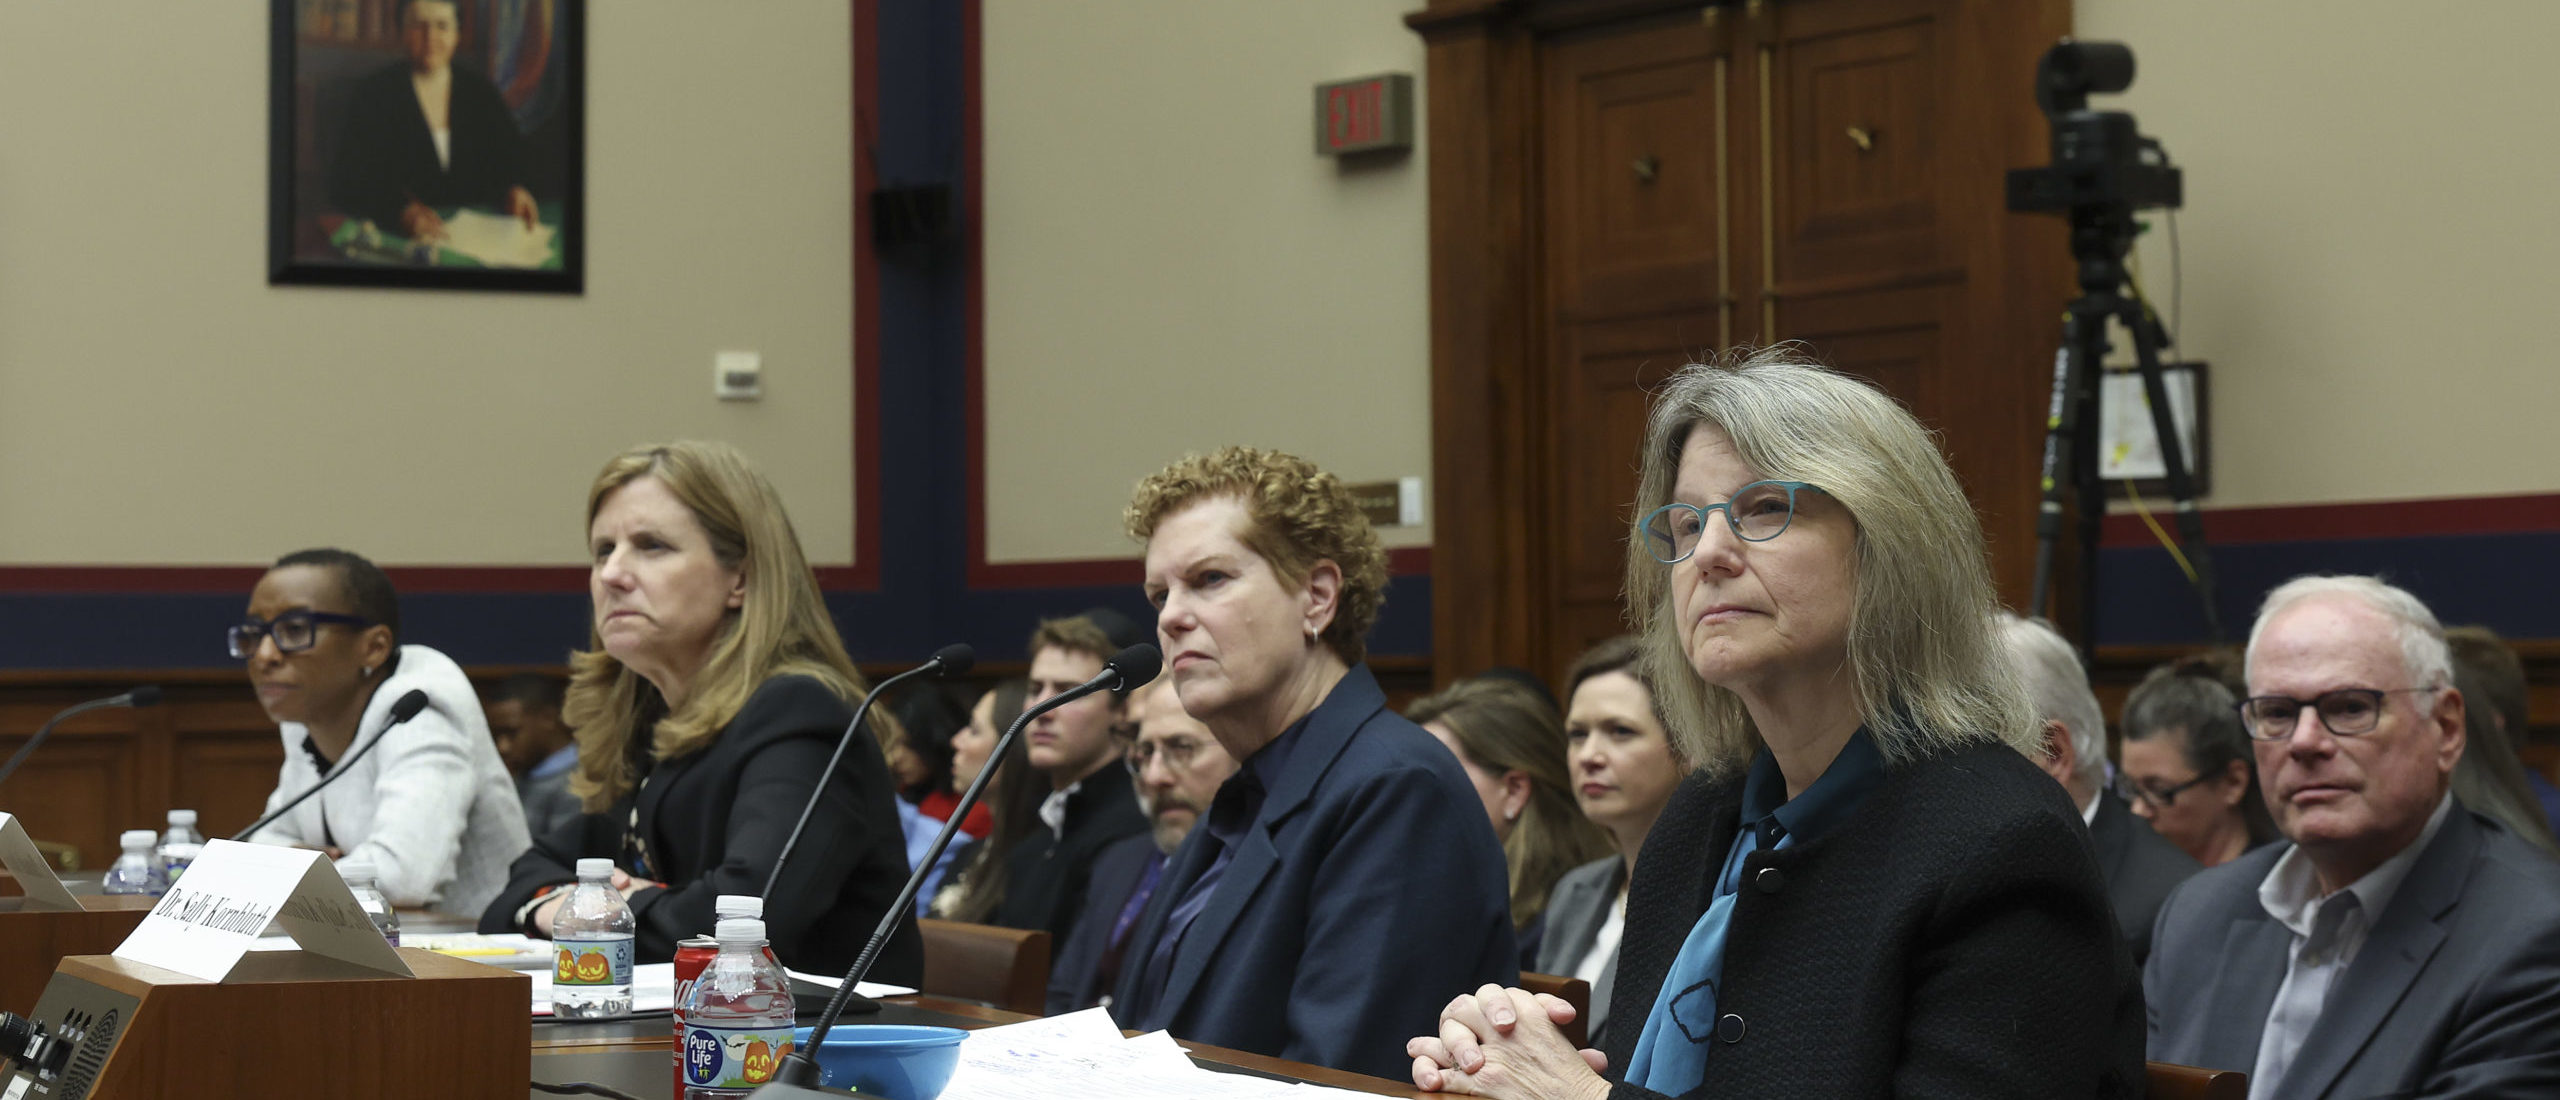 WASHINGTON, DC - DECEMBER 05: (L-R) Dr. Claudine Gay, President of Harvard University, Liz Magill, President of University of Pennsylvania, Dr. Pamela Nadell, Professor of History and Jewish Studies at American University, and Dr. Sally Kornbluth, President of Massachusetts Institute of Technology, testify before the House Education and Workforce Committee at the Rayburn House Office Building on December 05, 2023 in Washington, DC. (Photo by Kevin Dietsch/Getty Images)